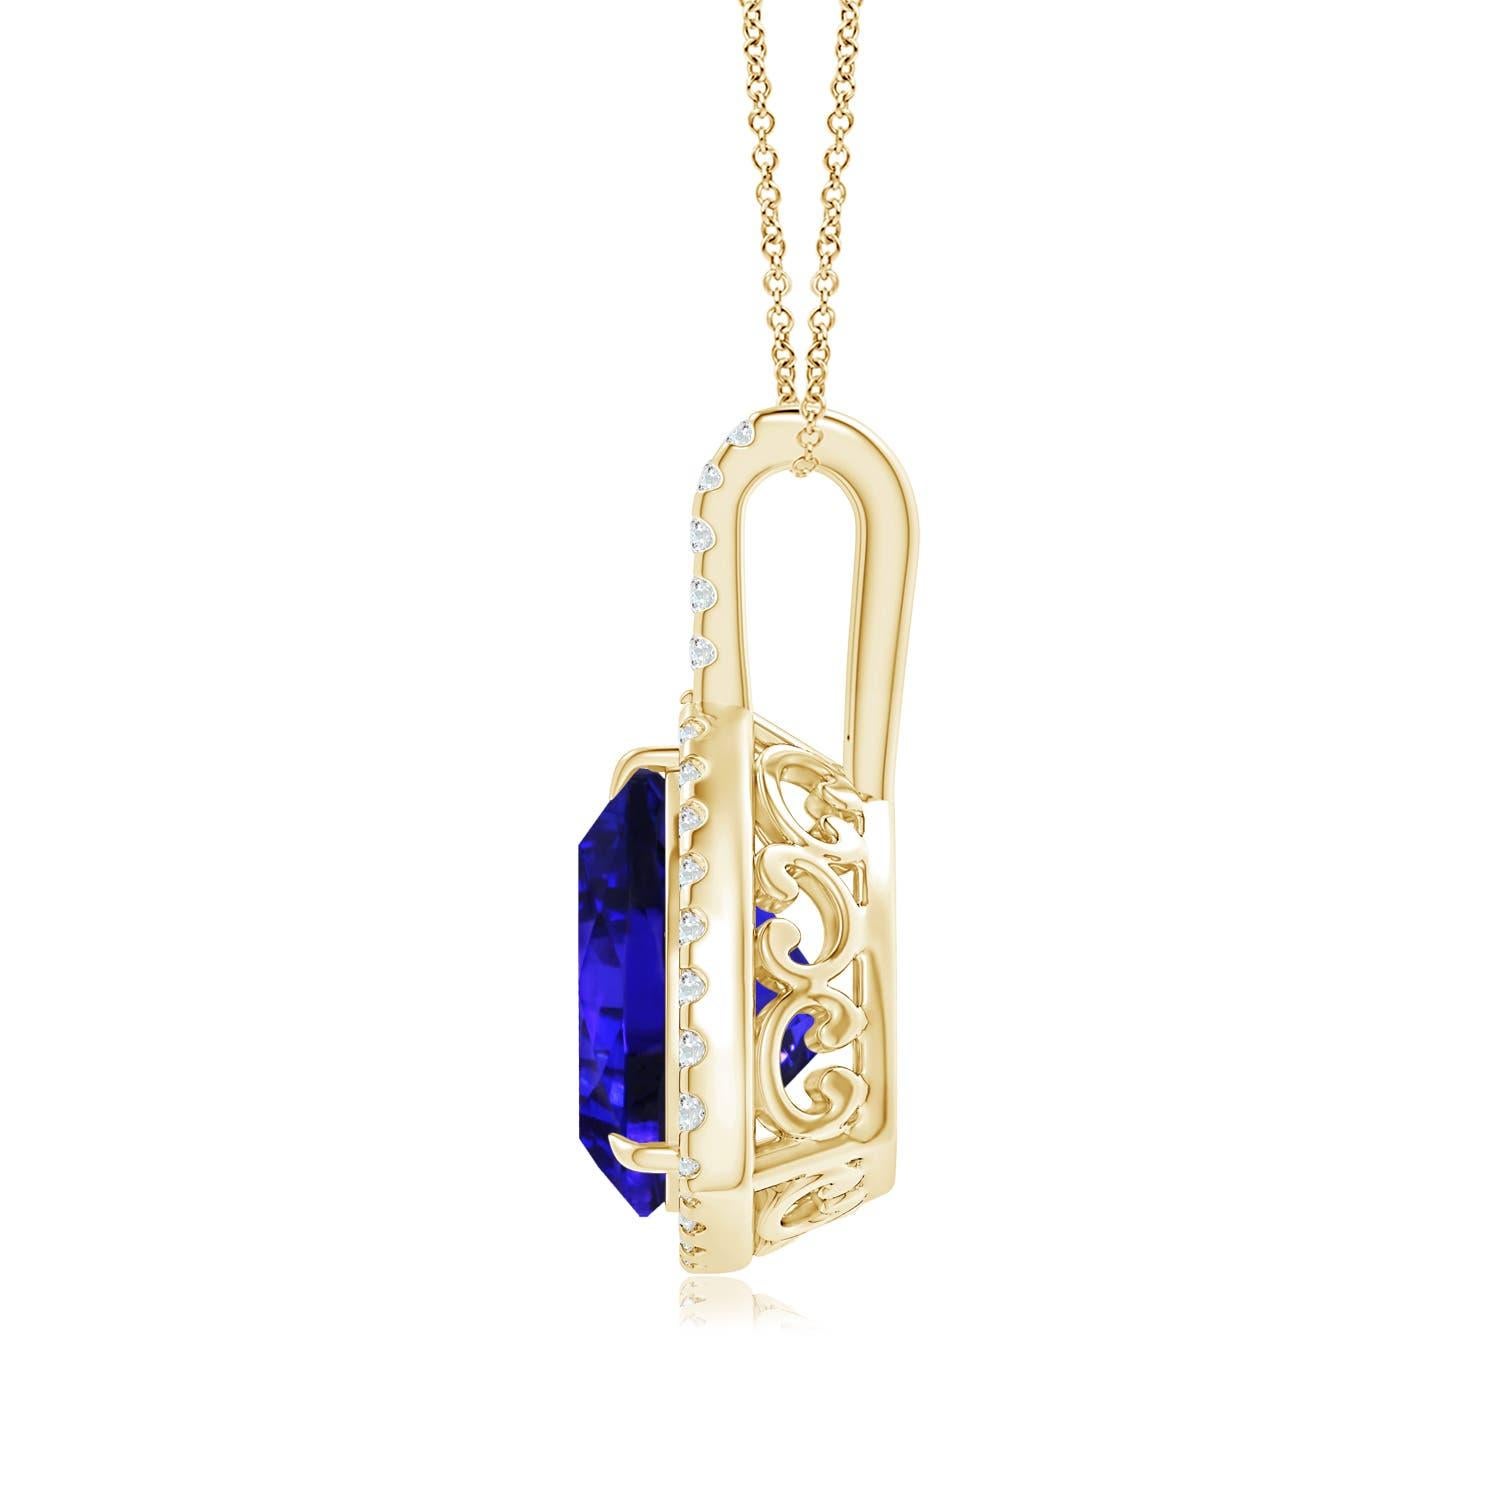 Designed with a diamond-studded bale and elegant scrollwork on the metal, this trillion tanzanite halo pendant in 18k yellow gold looks simple yet enigmatic. The brilliant u prong diamonds enhance the bluish-purple hue of the GIA certified